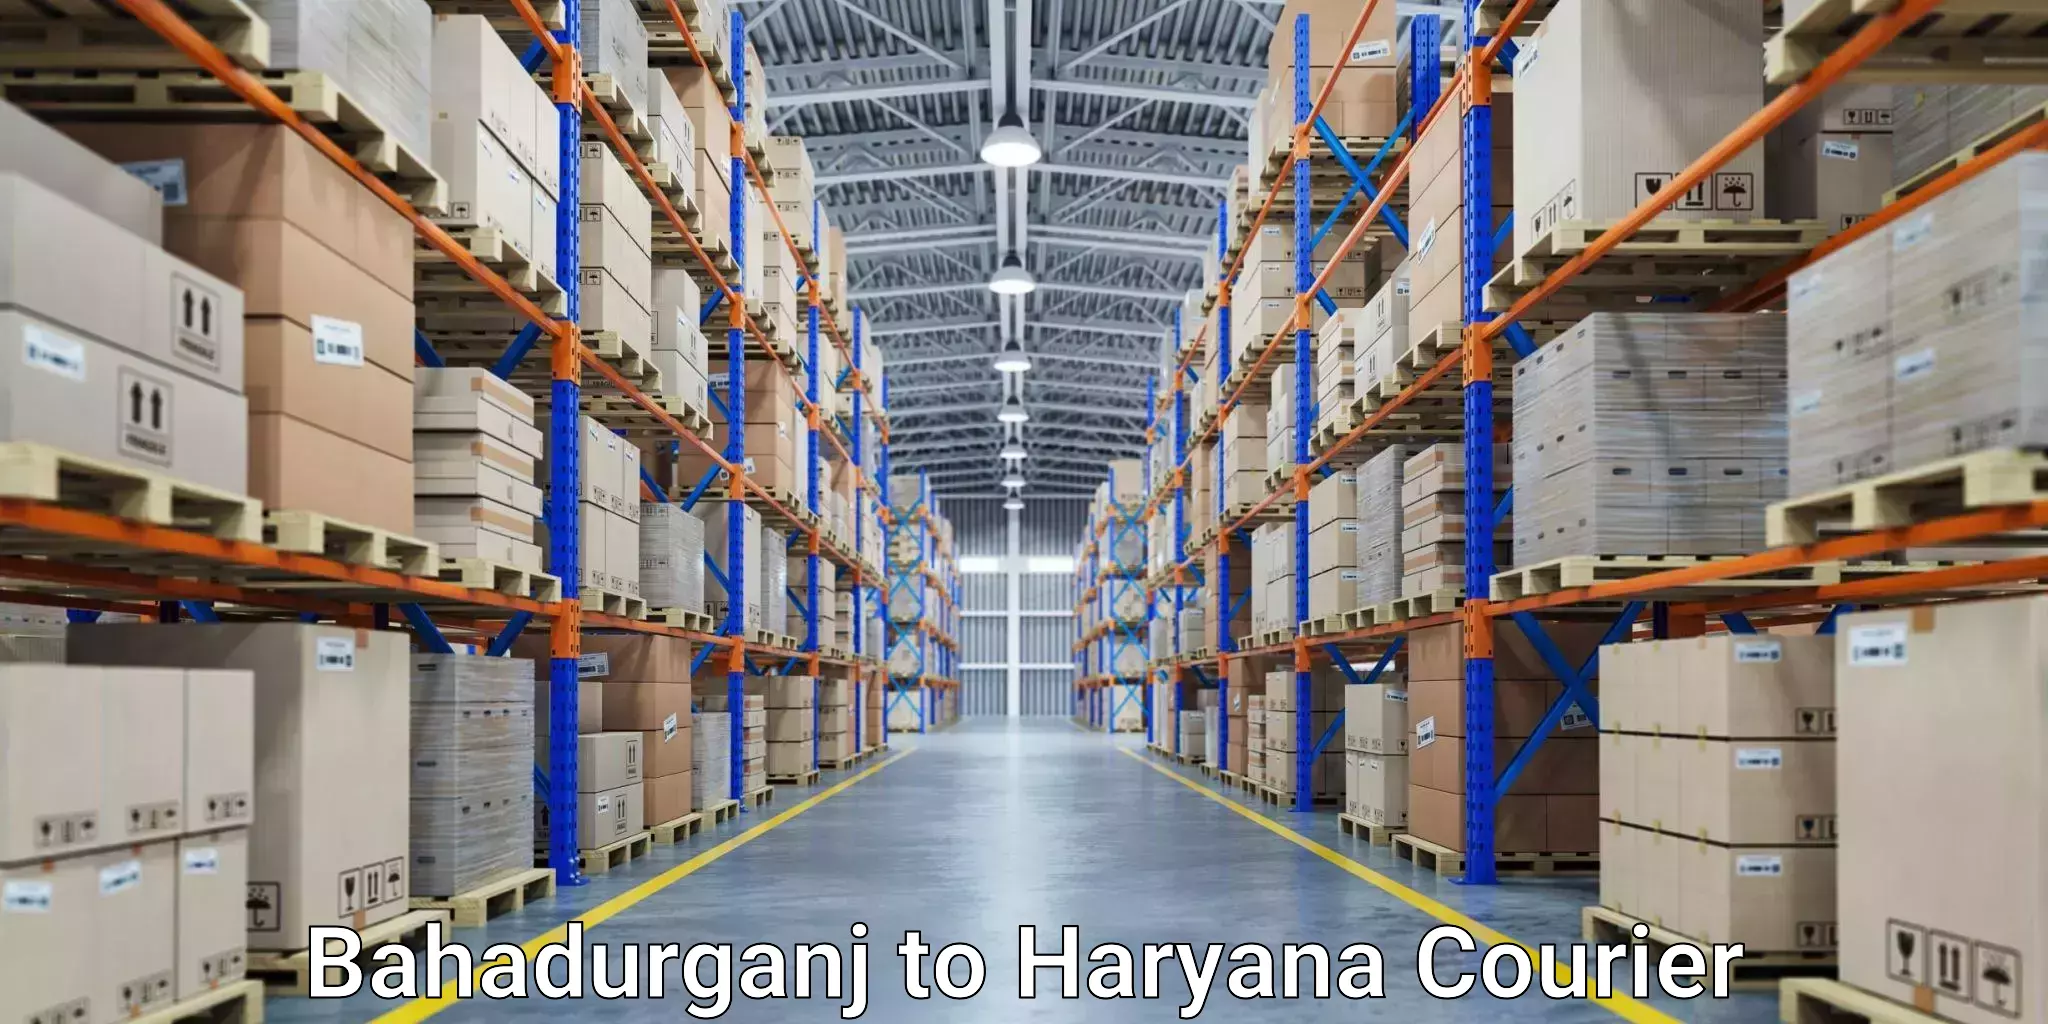 Reliable courier services in Bahadurganj to Bhuna